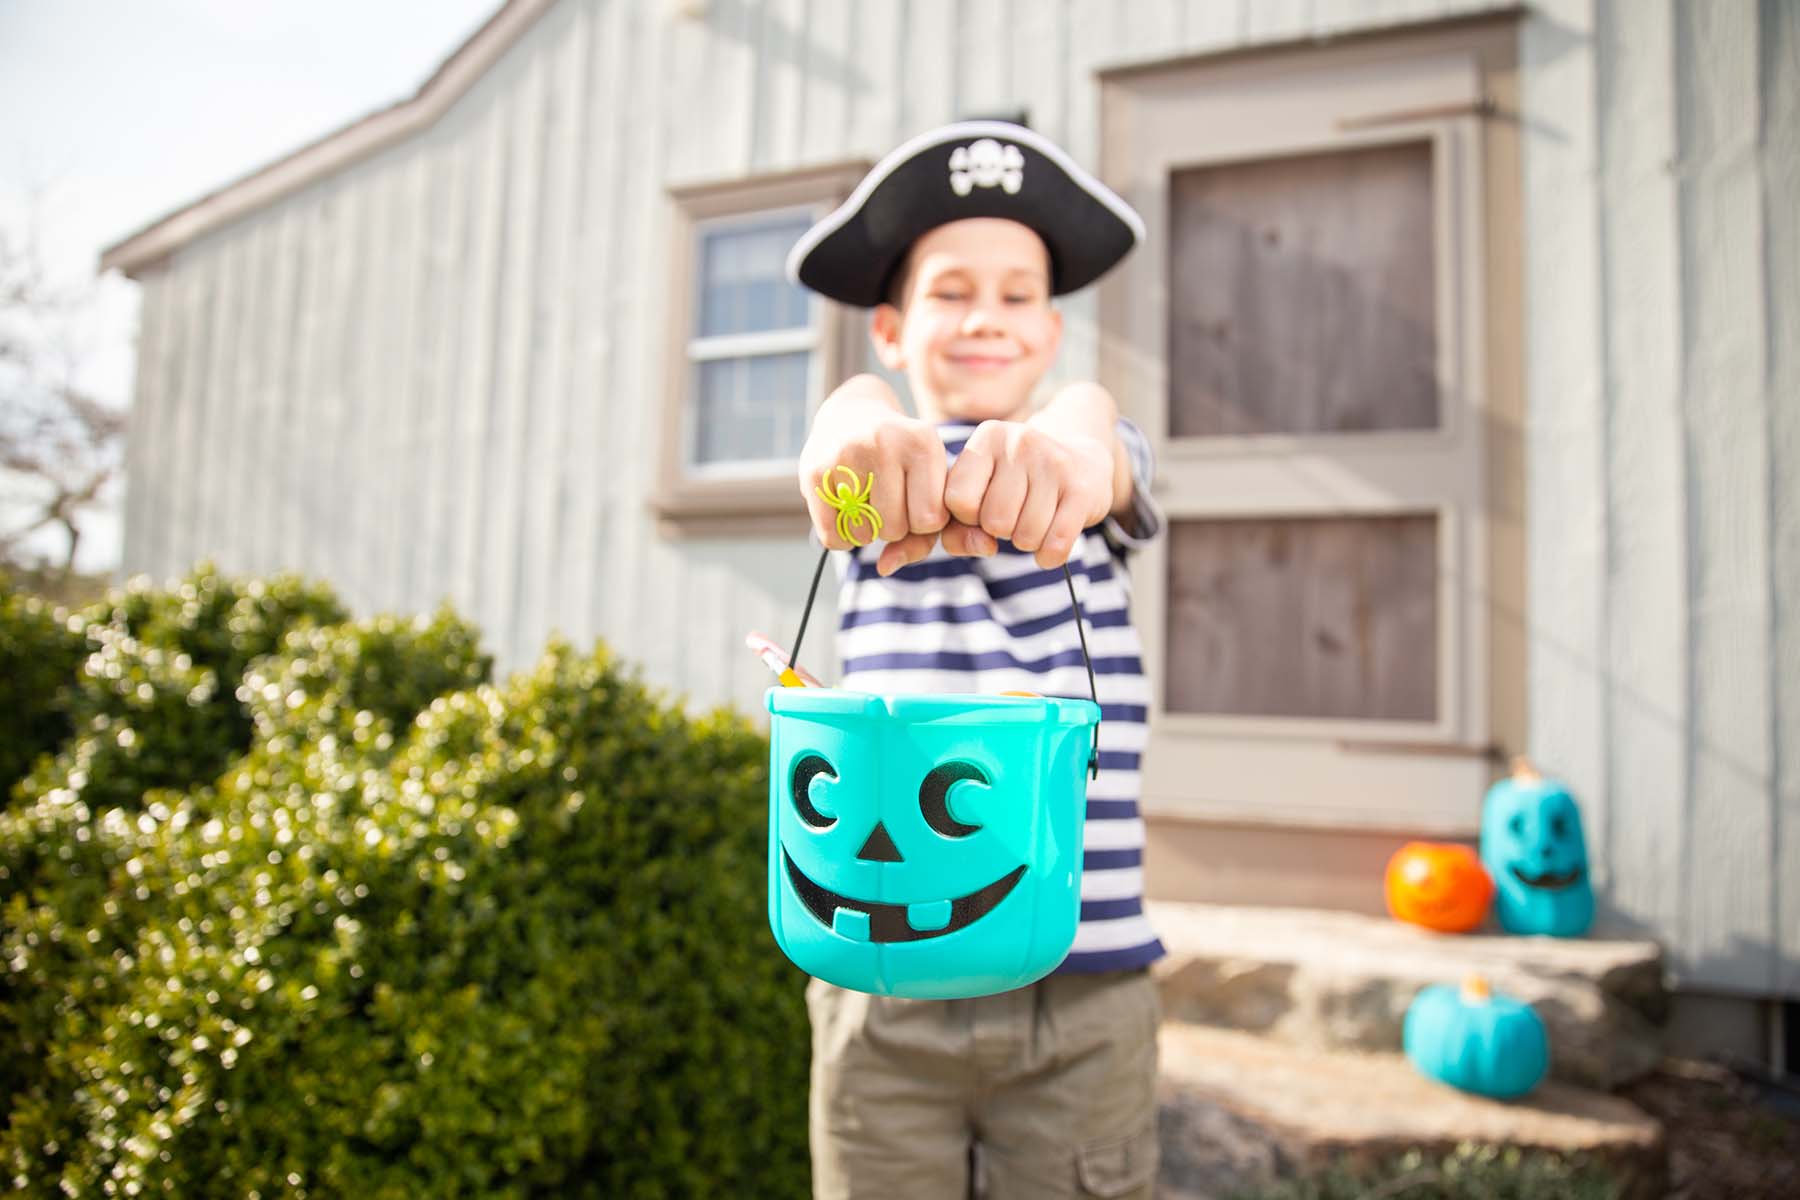 Boy in pirate hat holds teal Halloween pumpkin out. Teal shows that the child has food allergies.